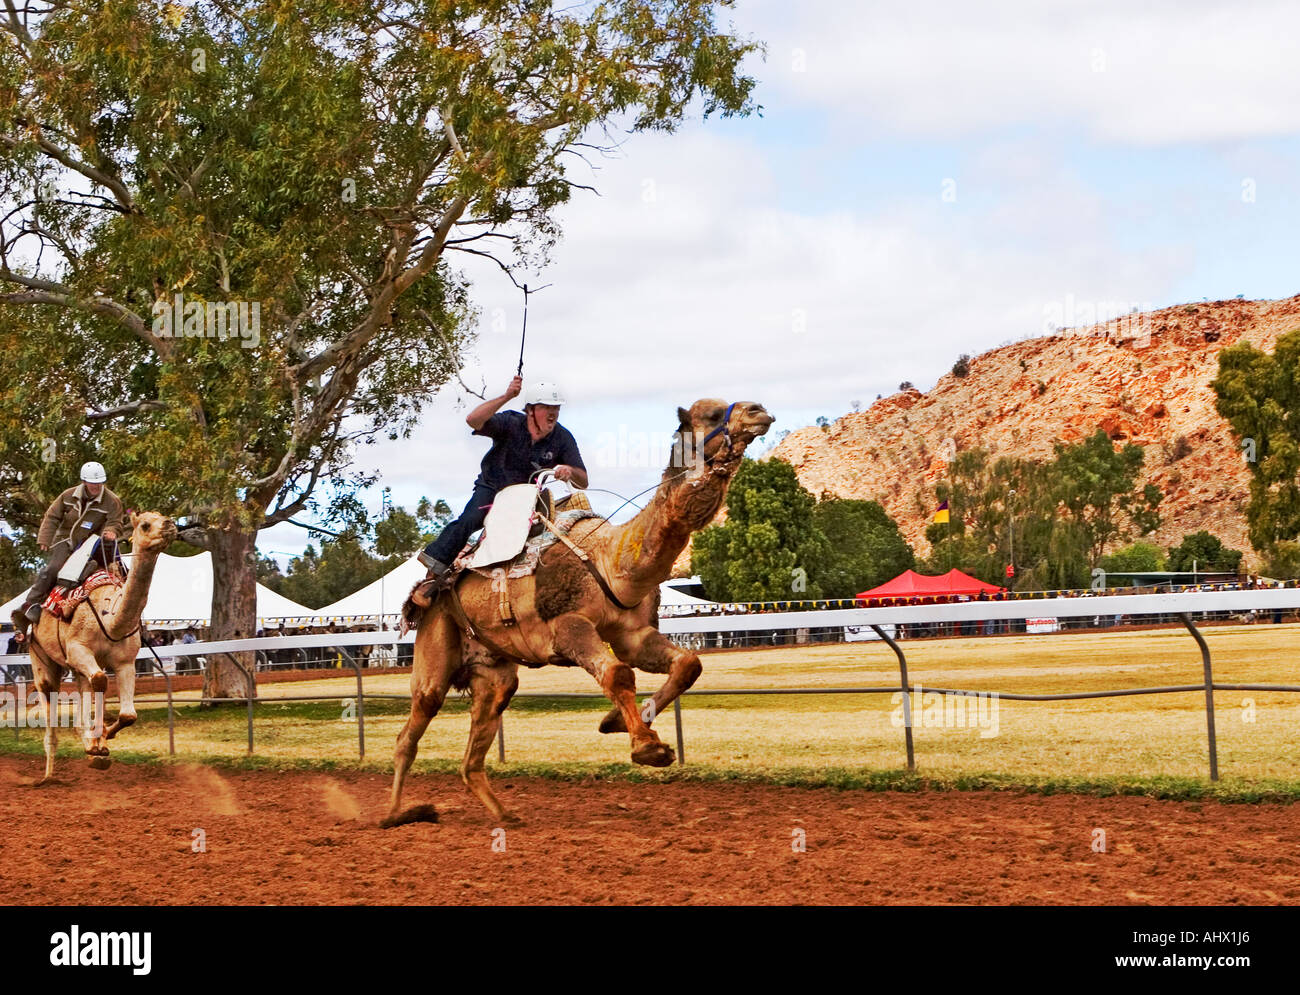 Image of a man racing a camel during the 2006 Camel Cup Race in Alice Springs Australia Stock Photo